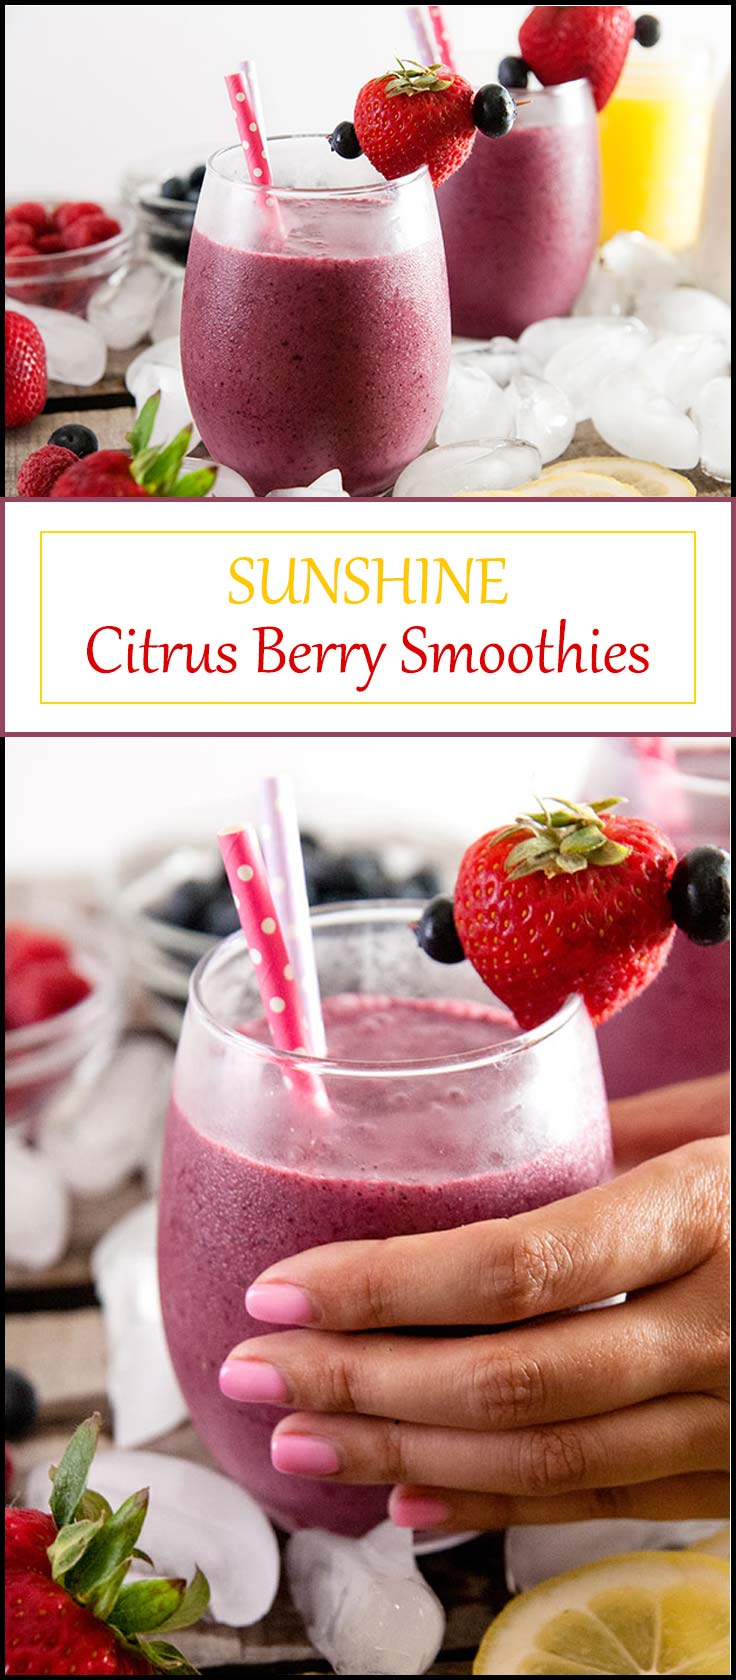 A light and refreshing no sugar added citrus berry smoothie recipe perfect for summer breakfast or snacks from www.seasonedsprinkles.com